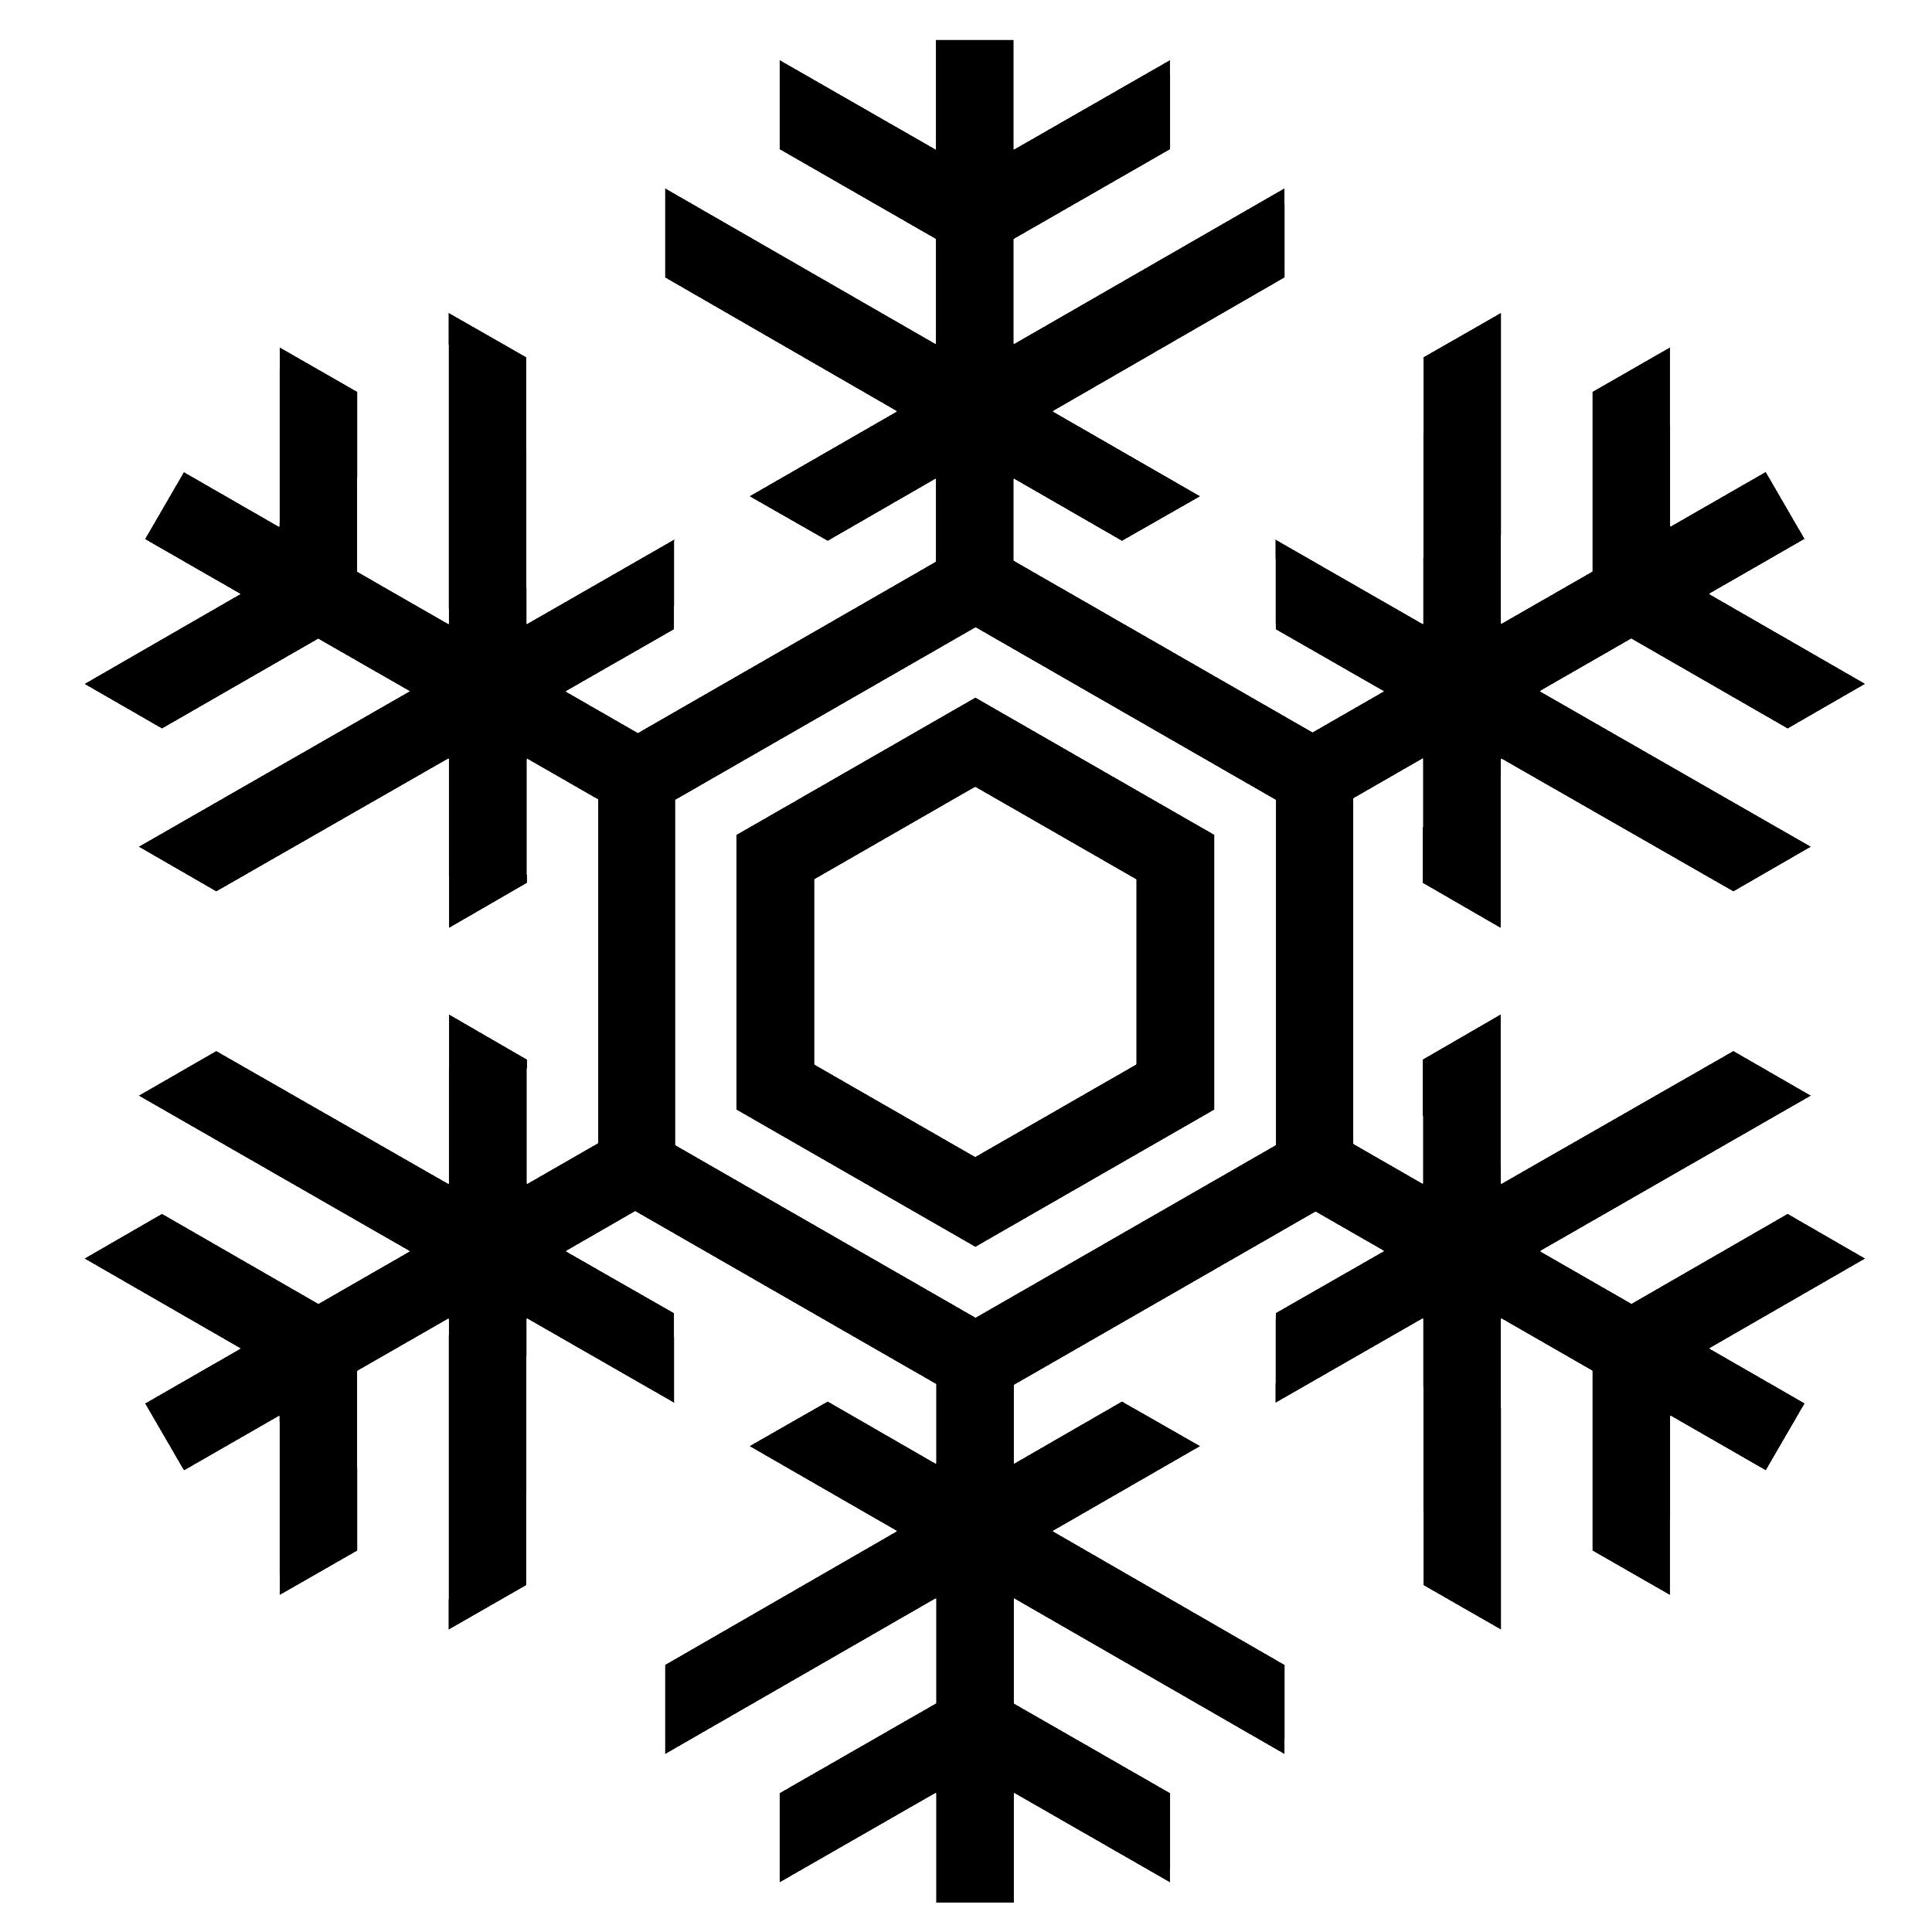 Clipart snowflake black and white. Silhouette google search shapes